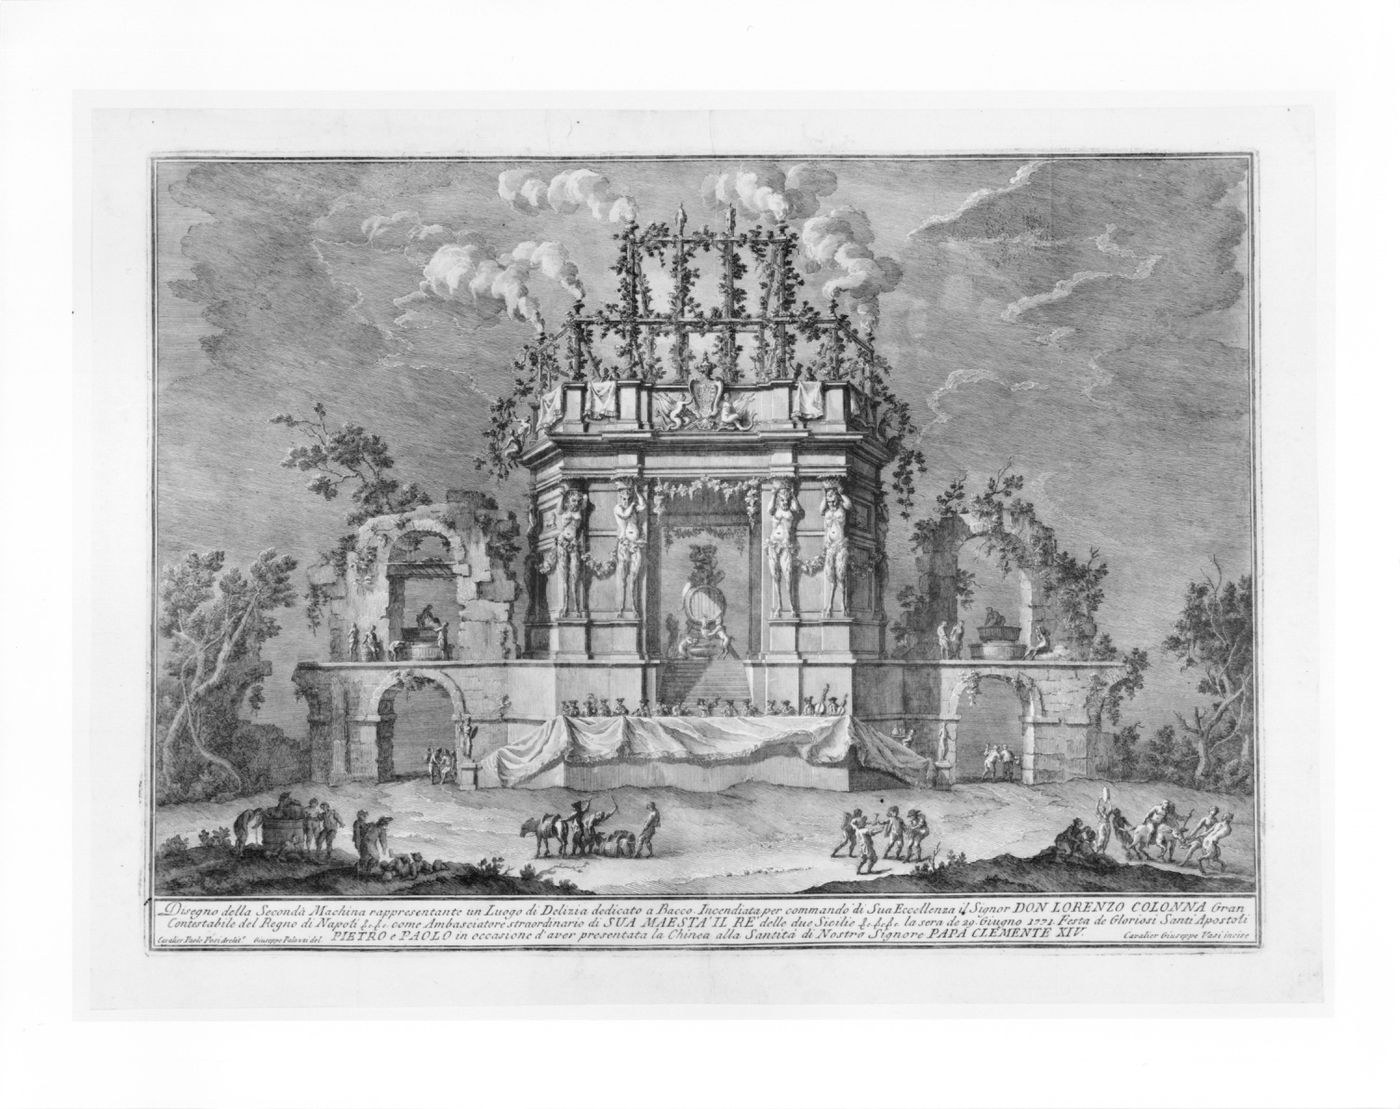 Etching of Posi's design for the "seconda macchina" of 1771